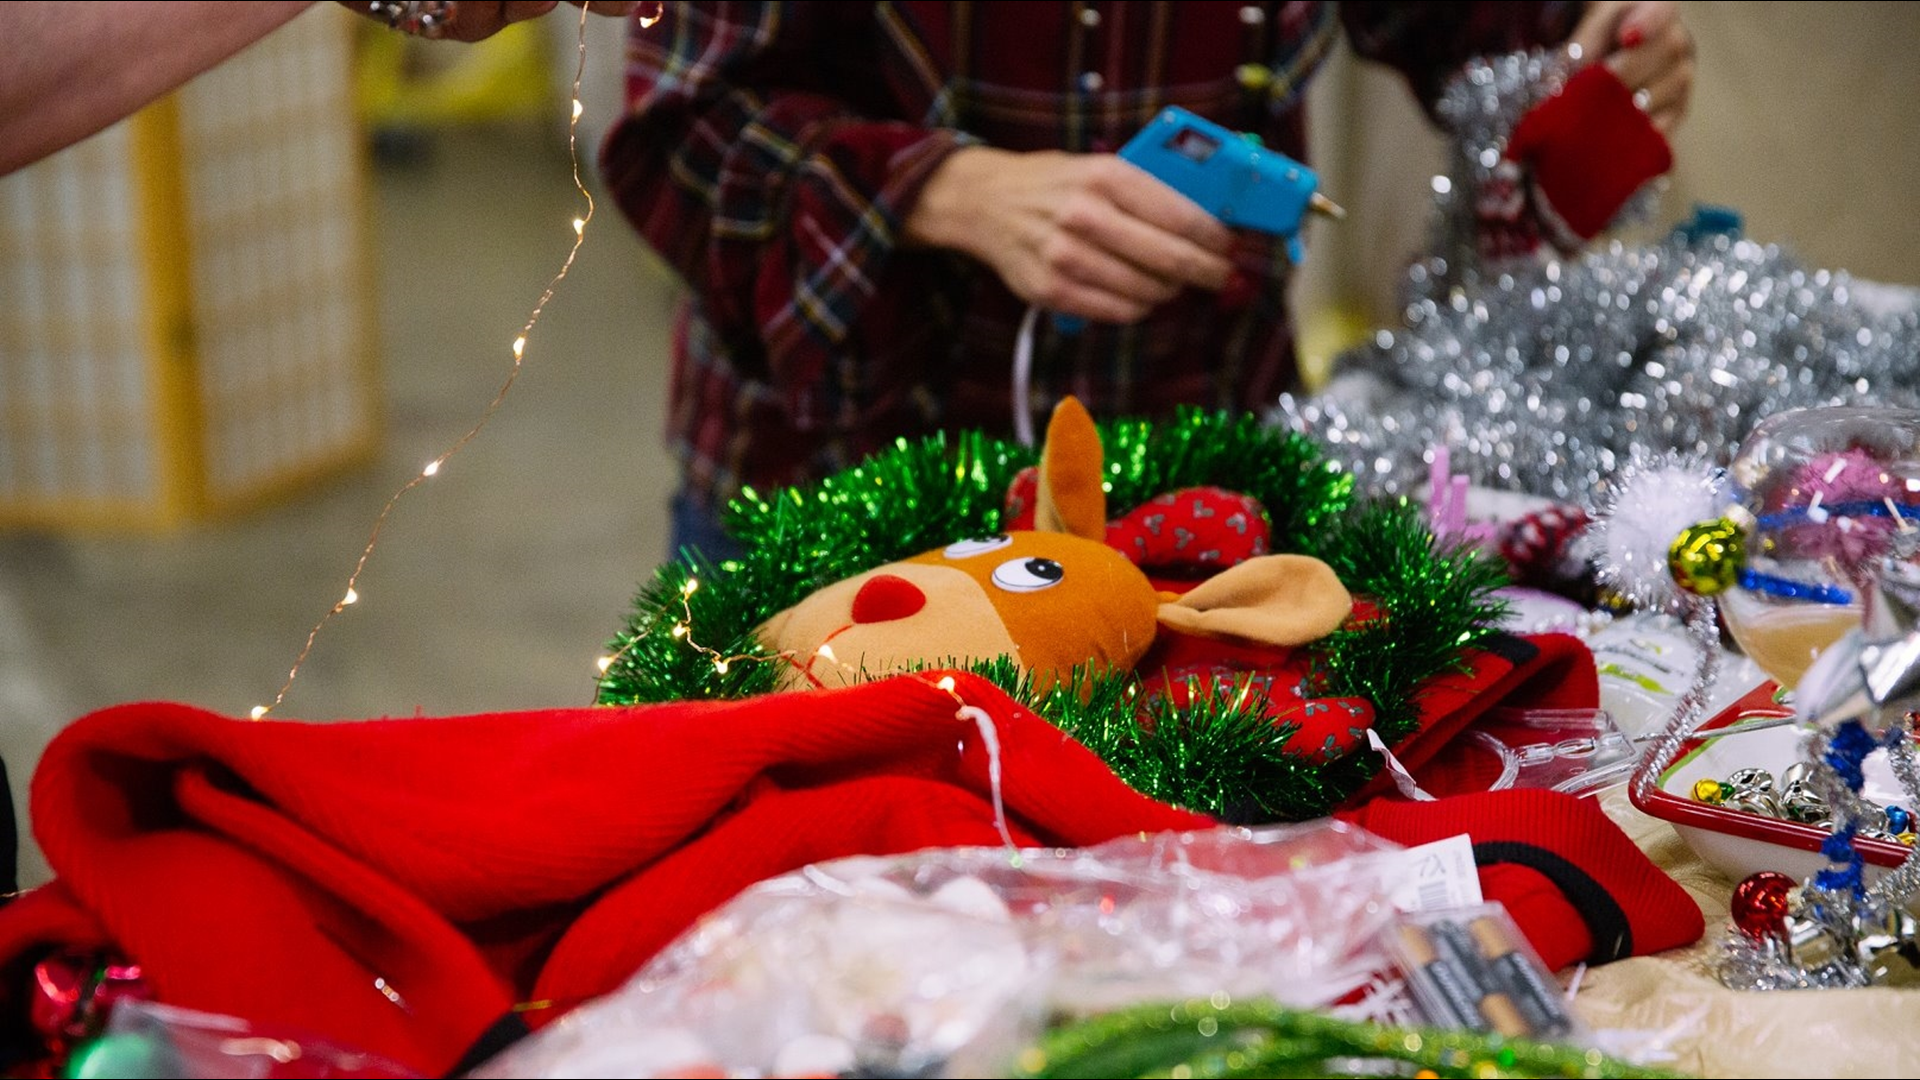 Personalize the holidays with a thrift-store foray at your local Goodwill store. Sponsored by Seattle Goodwill.